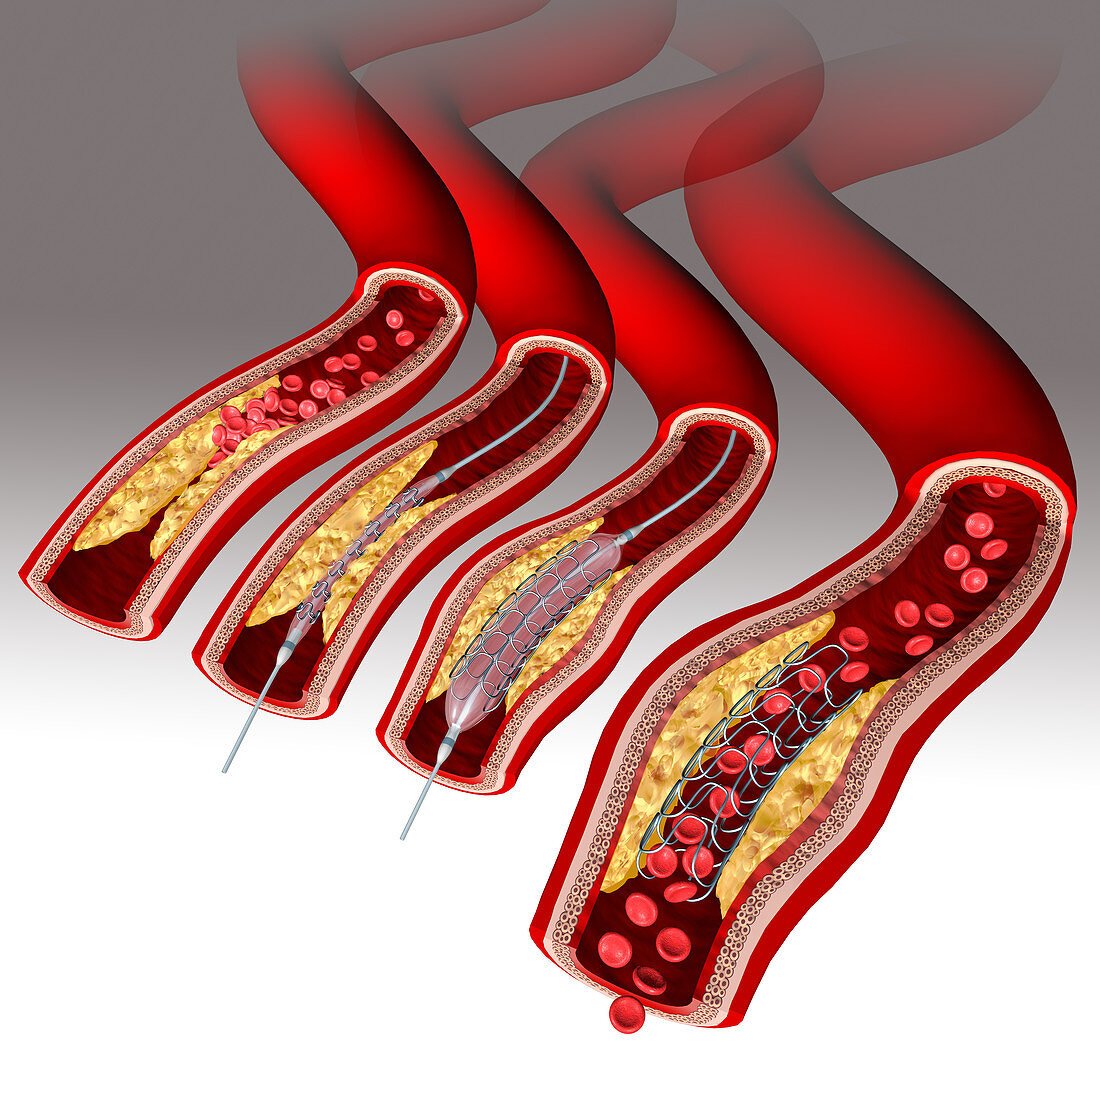 Angioplasty with stent placement, illustration